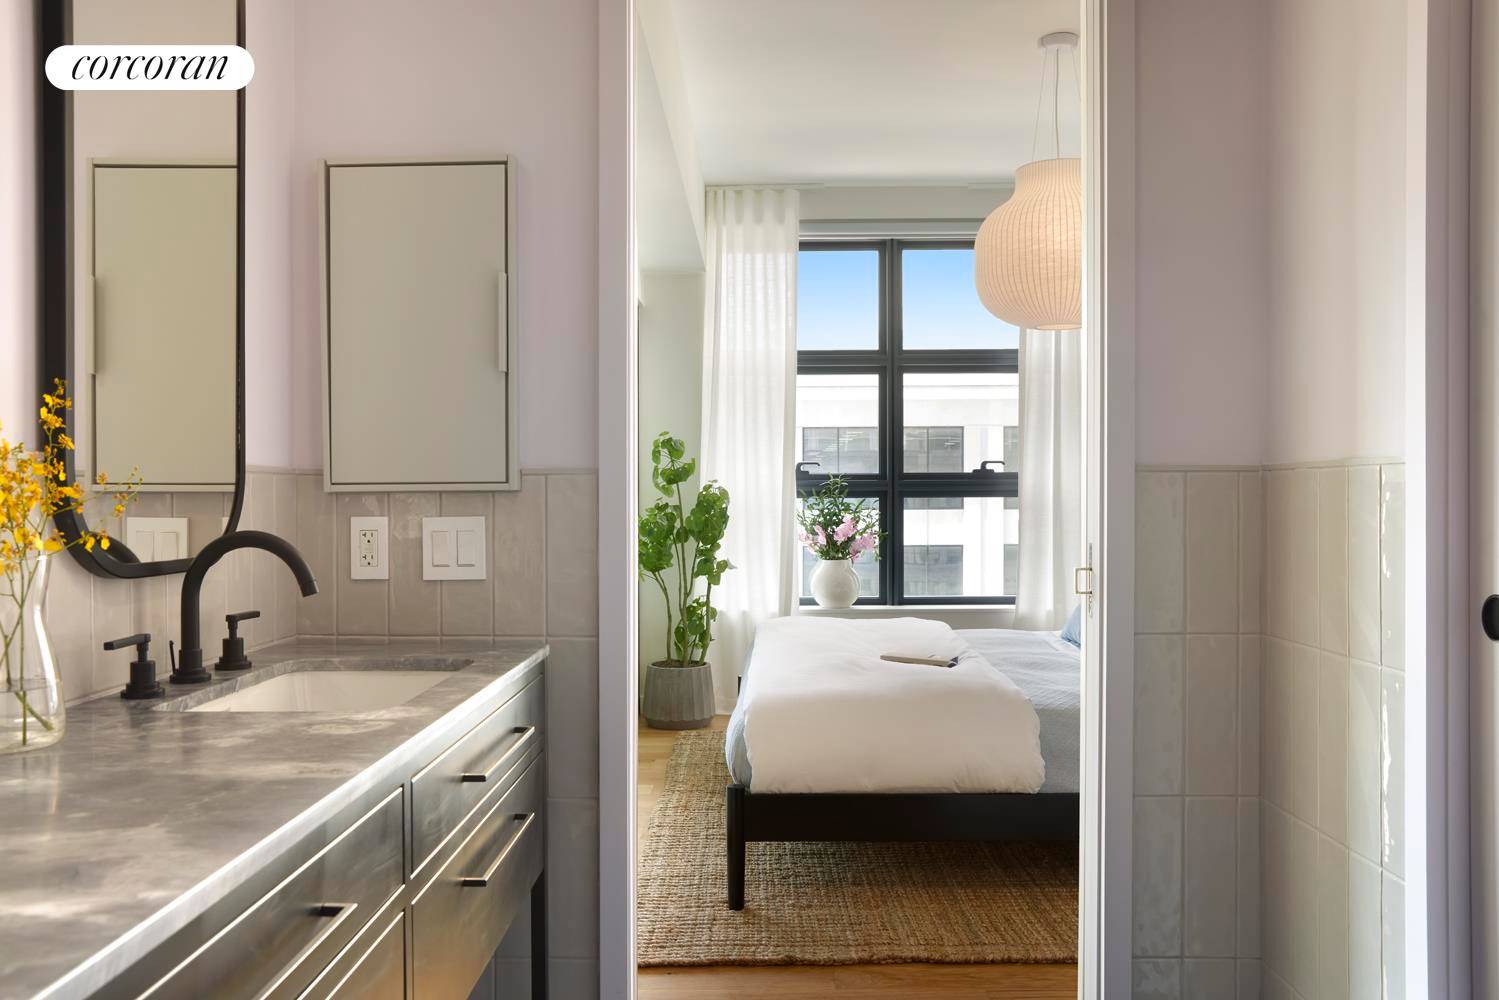 547 West 47th Street, 606The West Residence Club, Hell's Kitchen, New York, NY 10036547 West 47th Street offers lifestyle driven condominium residences with architecture and interiors by the innovative Dutch ...